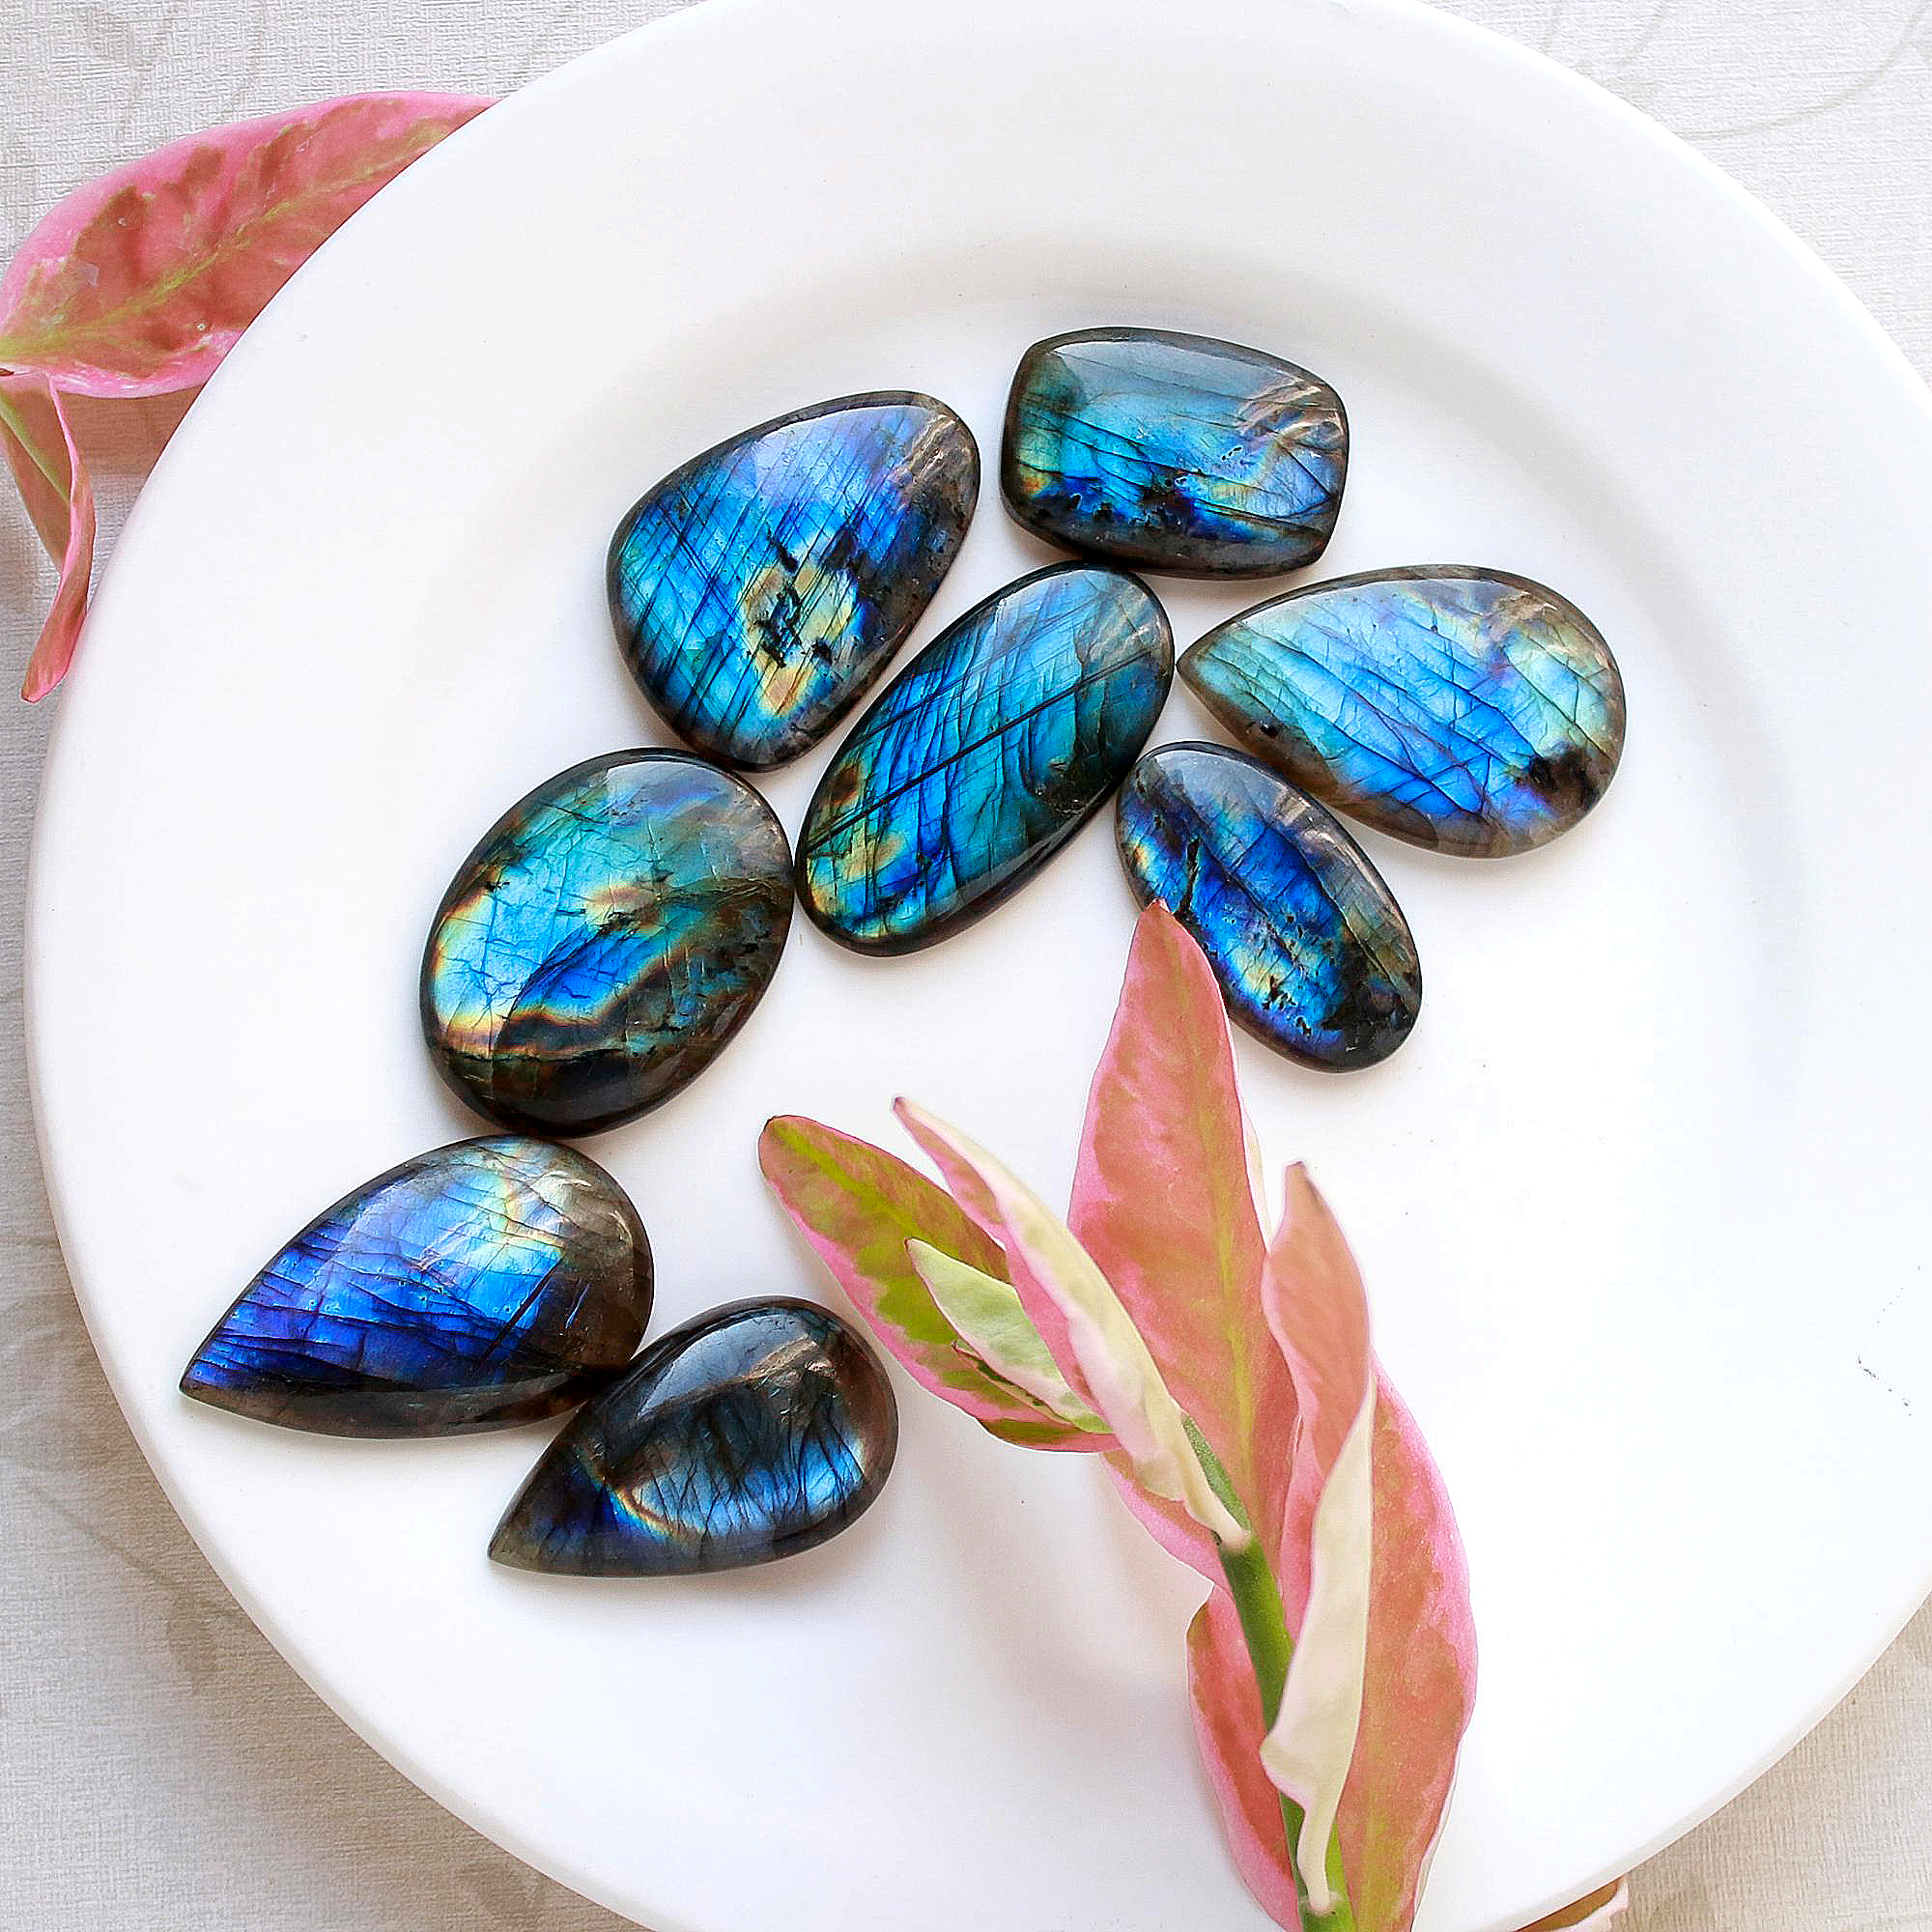 8 Pcs.387 Cts Natural labradorite Cabochon Loose Gemstone For Jewelry Wholesale Lot Size 43x25 31x22mm#1113